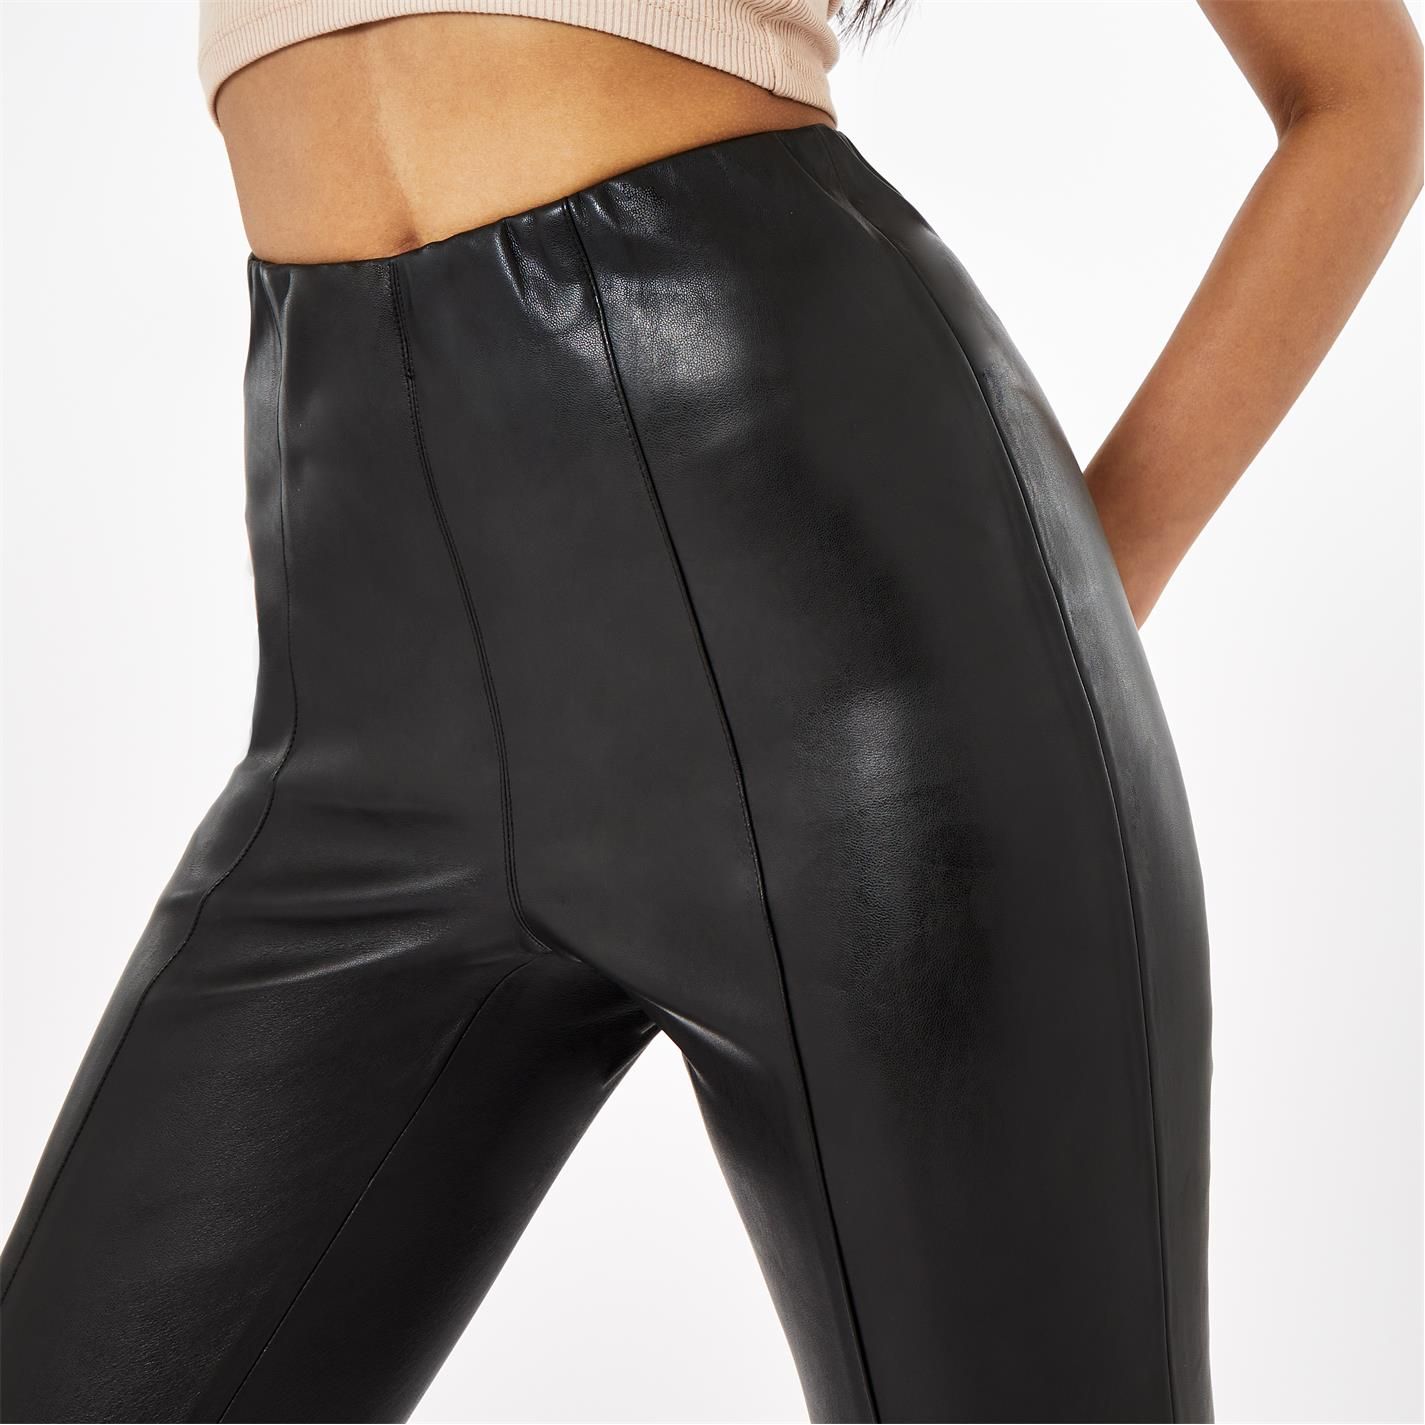 These Firetrap leggings are crafted in a PU fabric, looking stylish whatever the season. Crafted with visible seam details, these are a pair that create that fashion-forward leather look. The perfect rise, the perfect length, these will never let you down. Whatever you choose to style it with, put your best look forward.